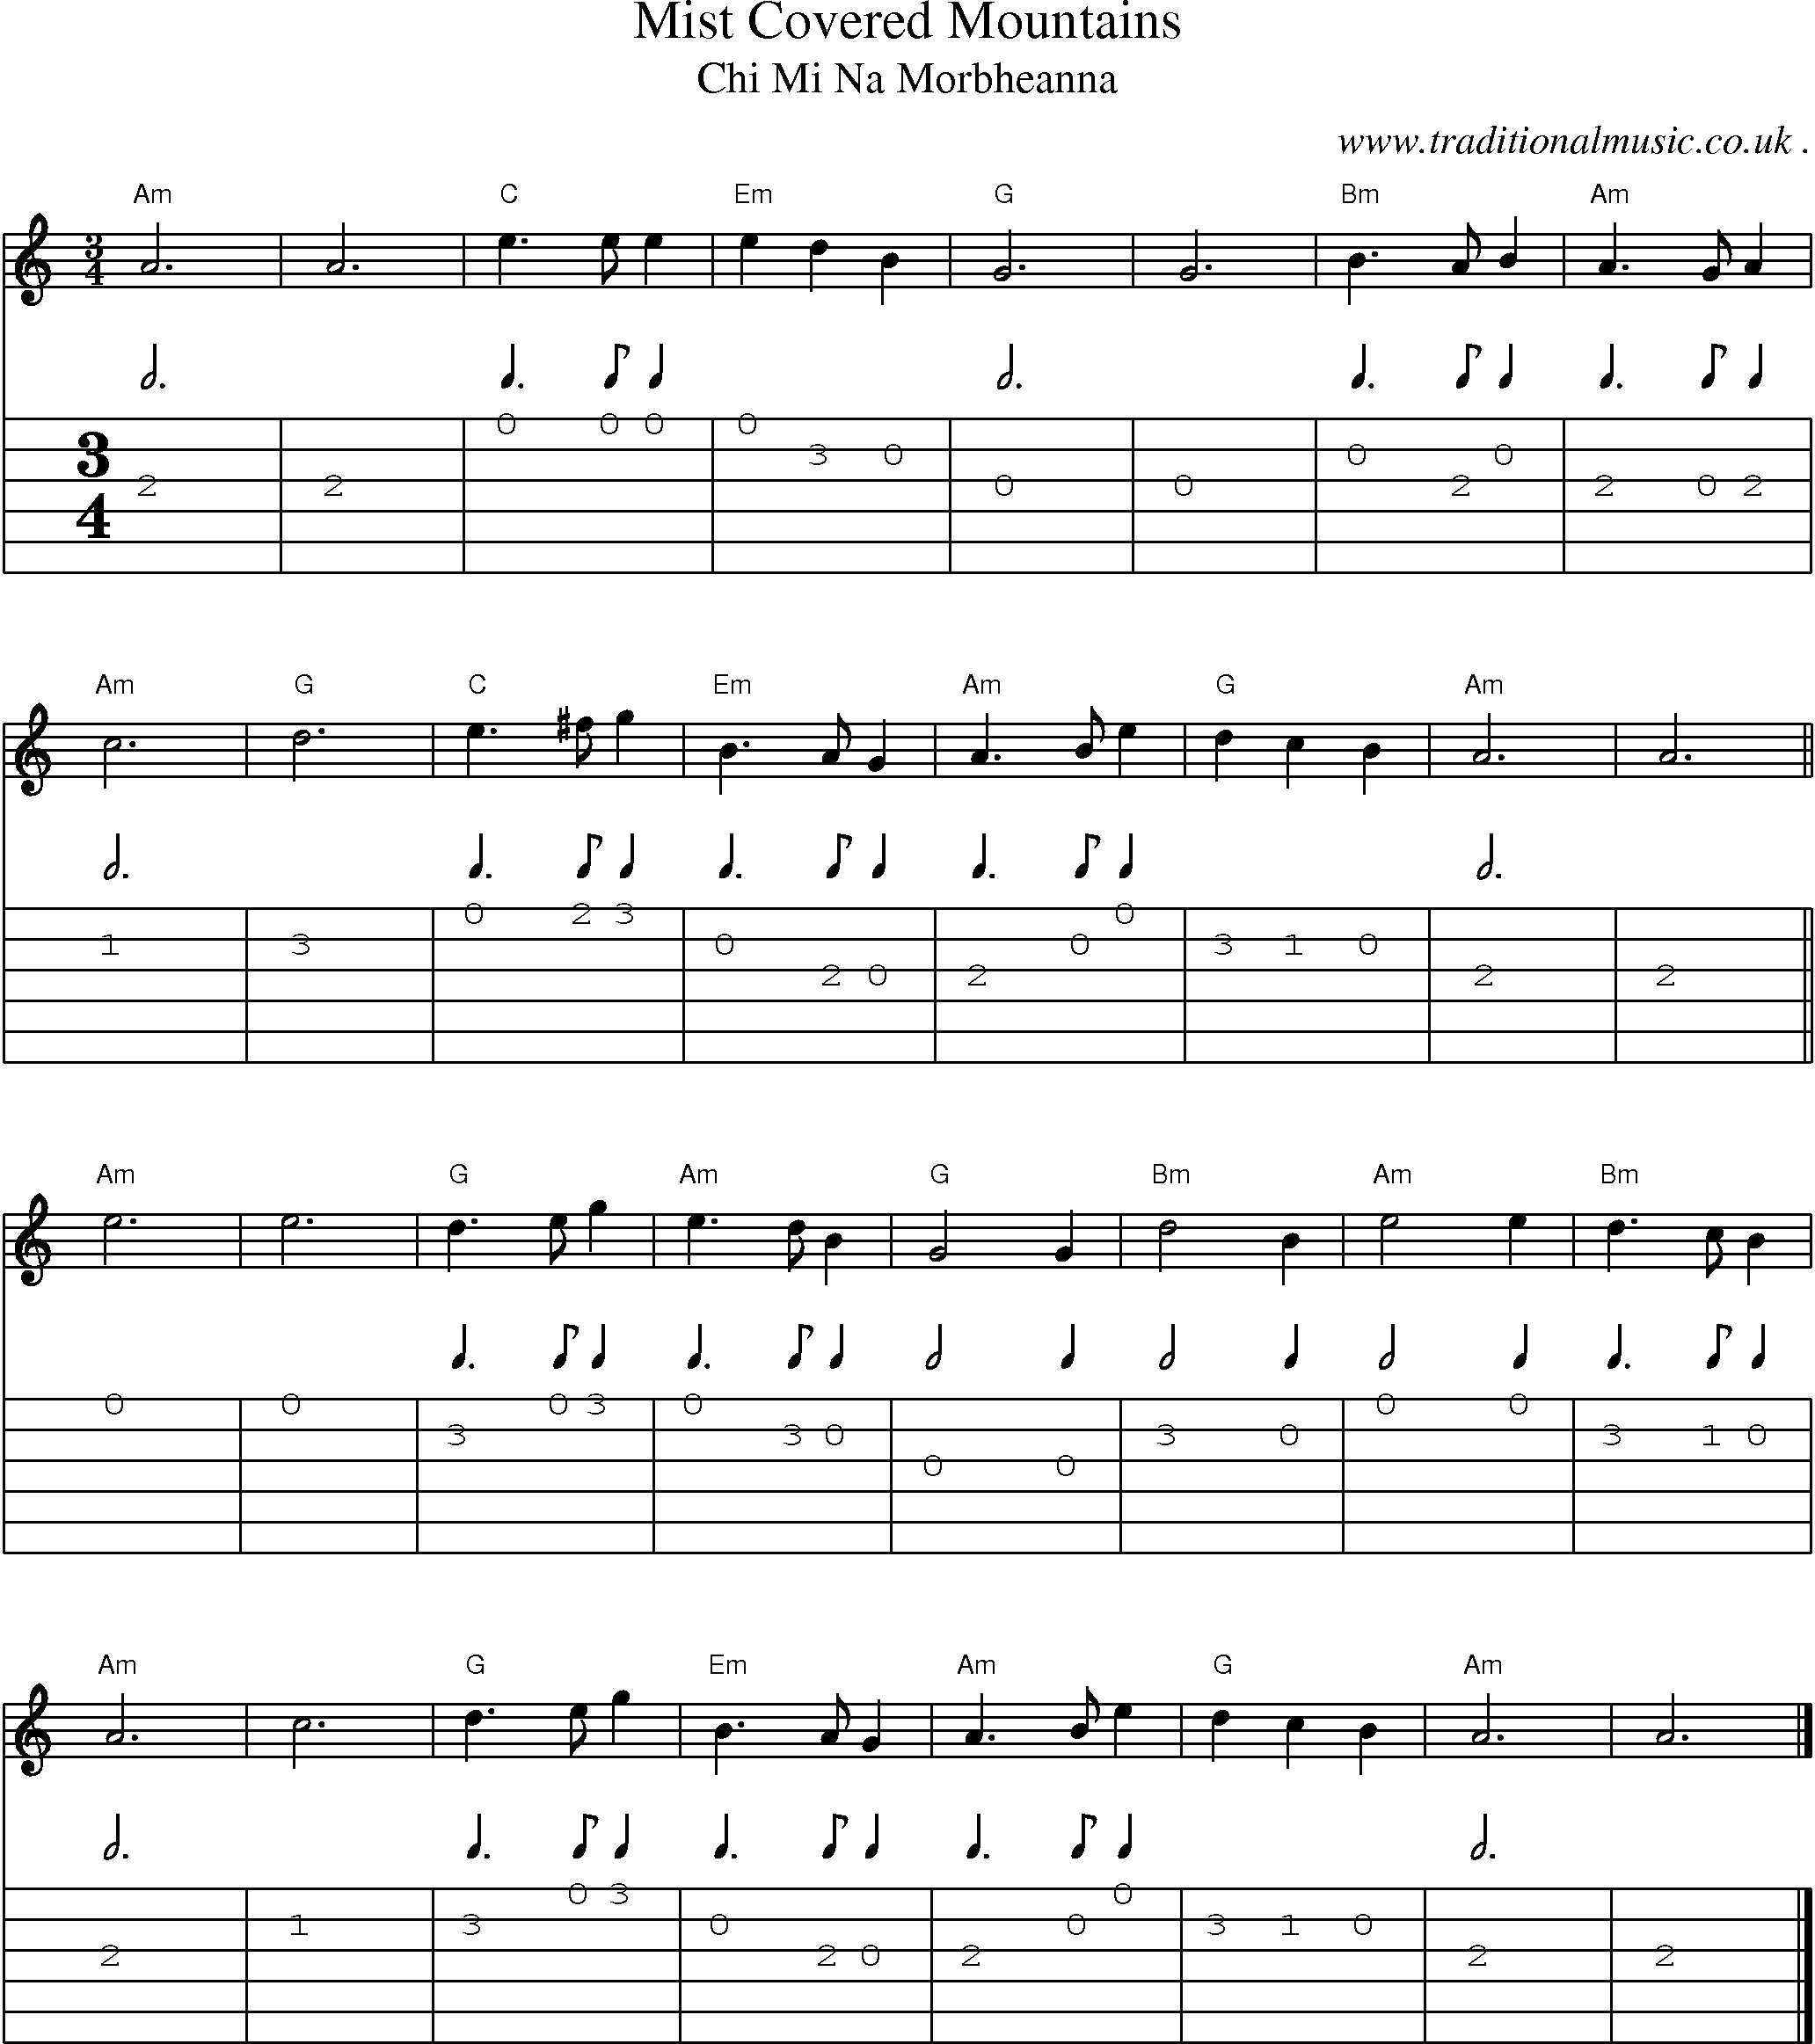 Music Score and Guitar Tabs for Mist Covered Mountains